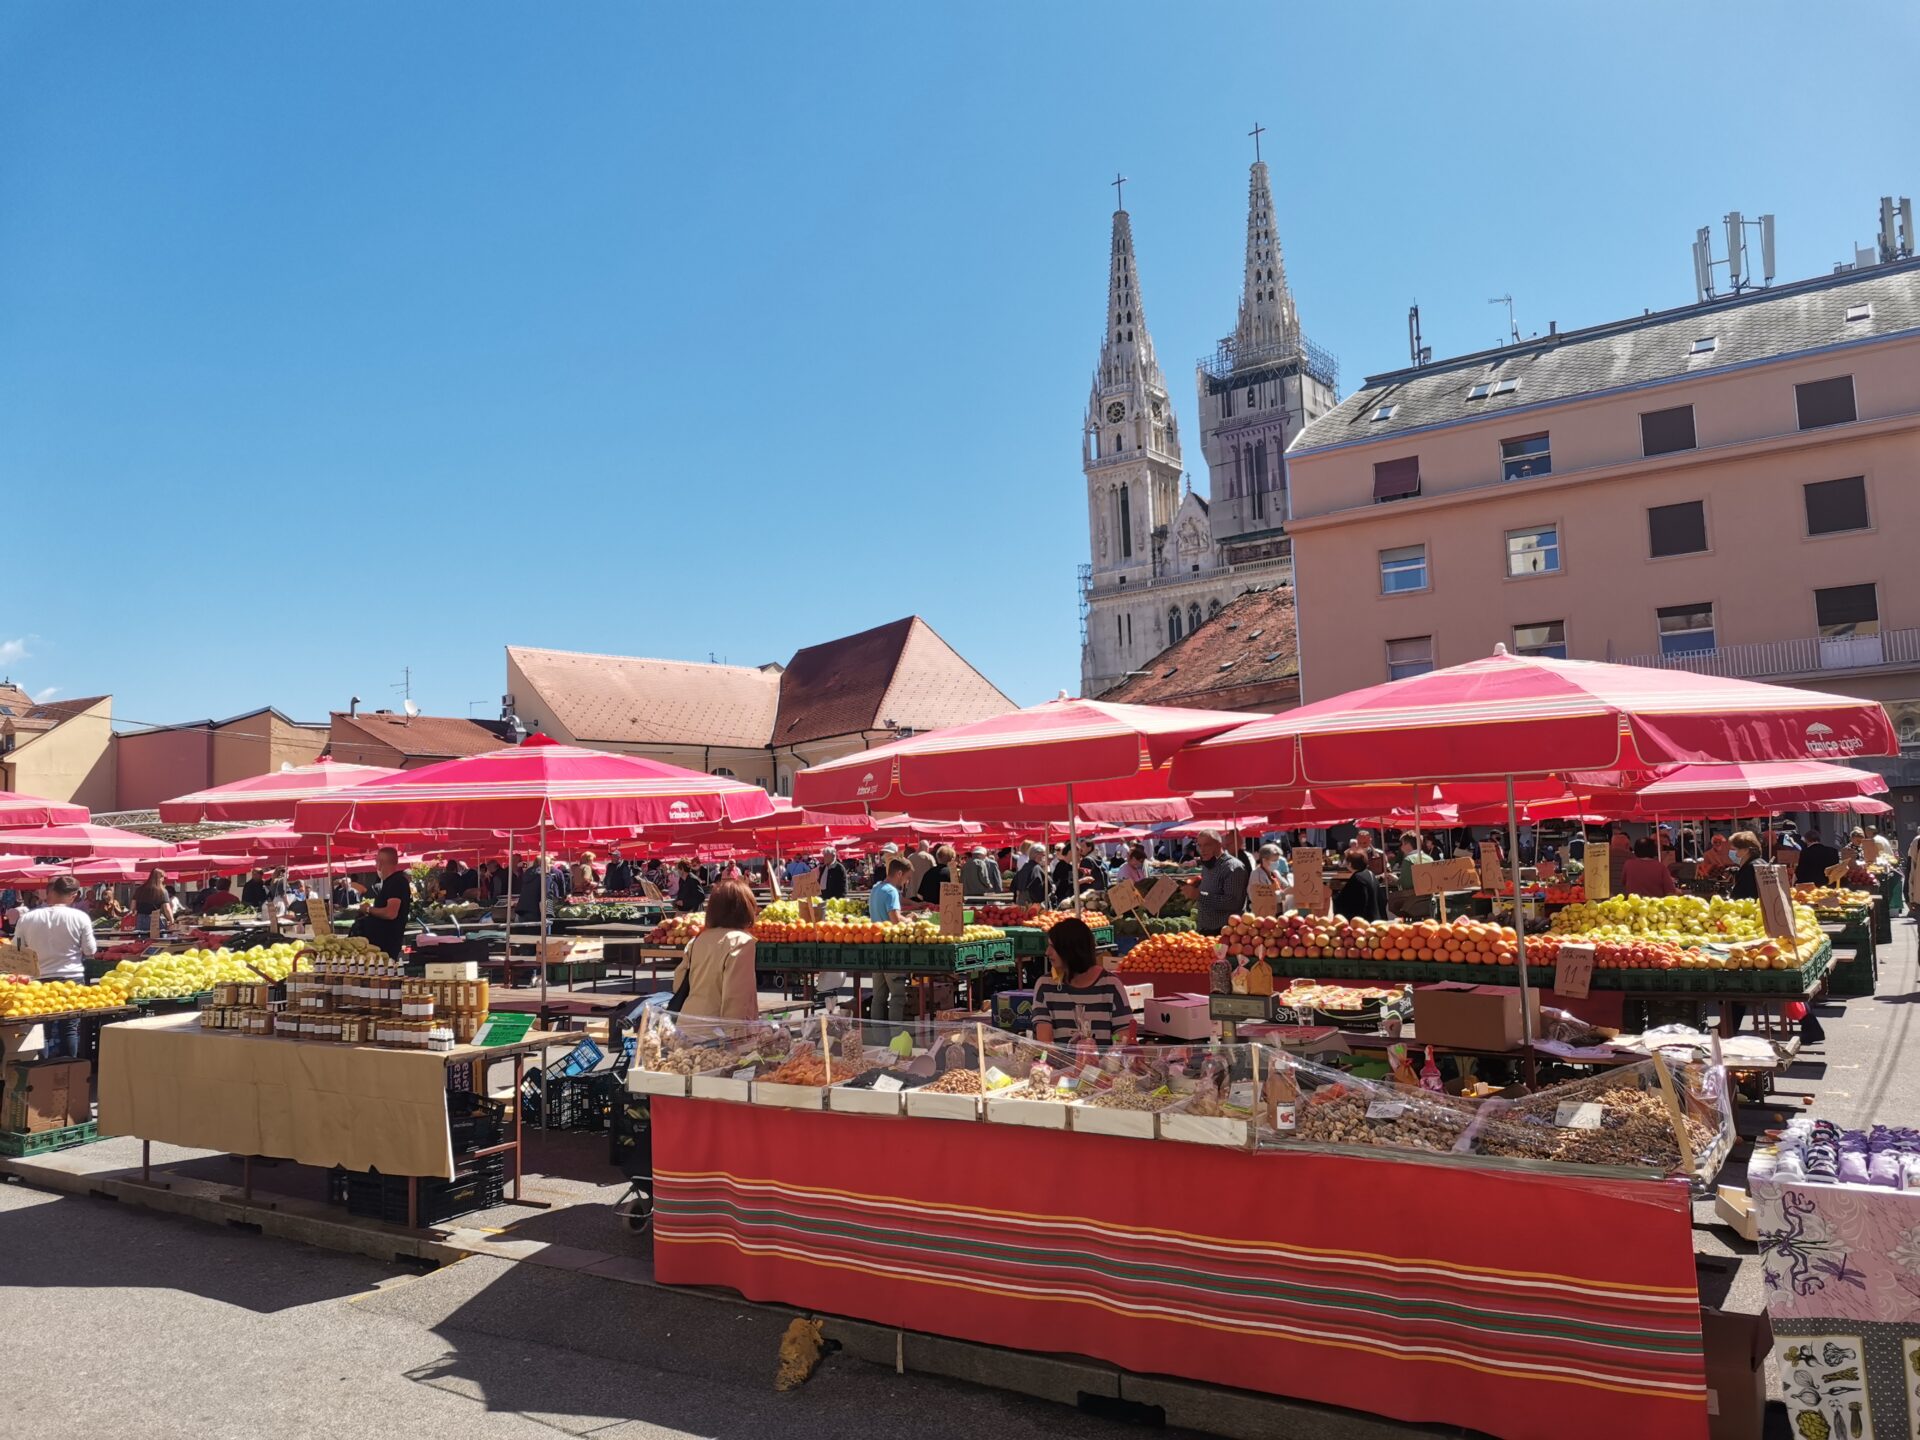 Looking over the busy farmers market, with the Cathedral in the background, at Dolac Market in Zagreb, Croatia